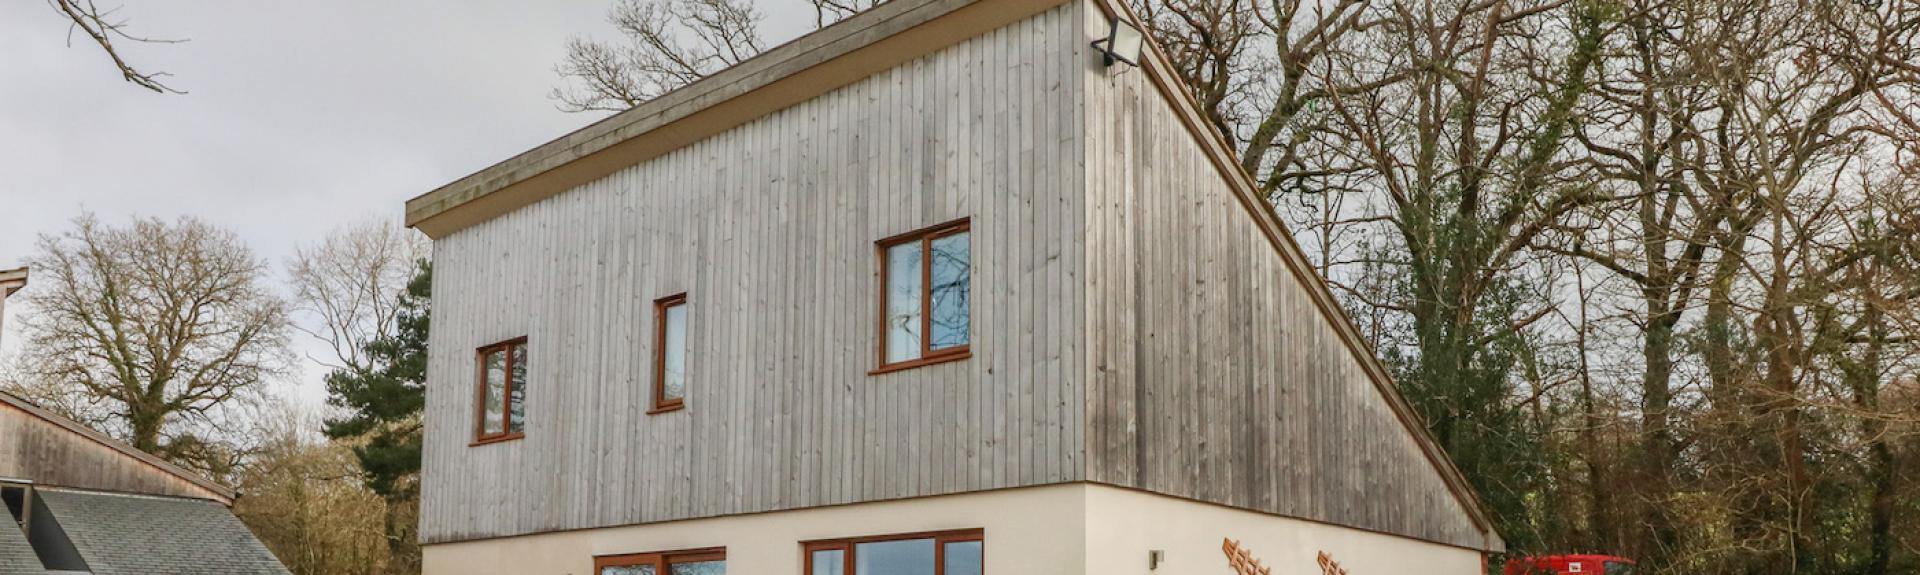 A 2-storey wooden holiday home in the Quantock Hills.